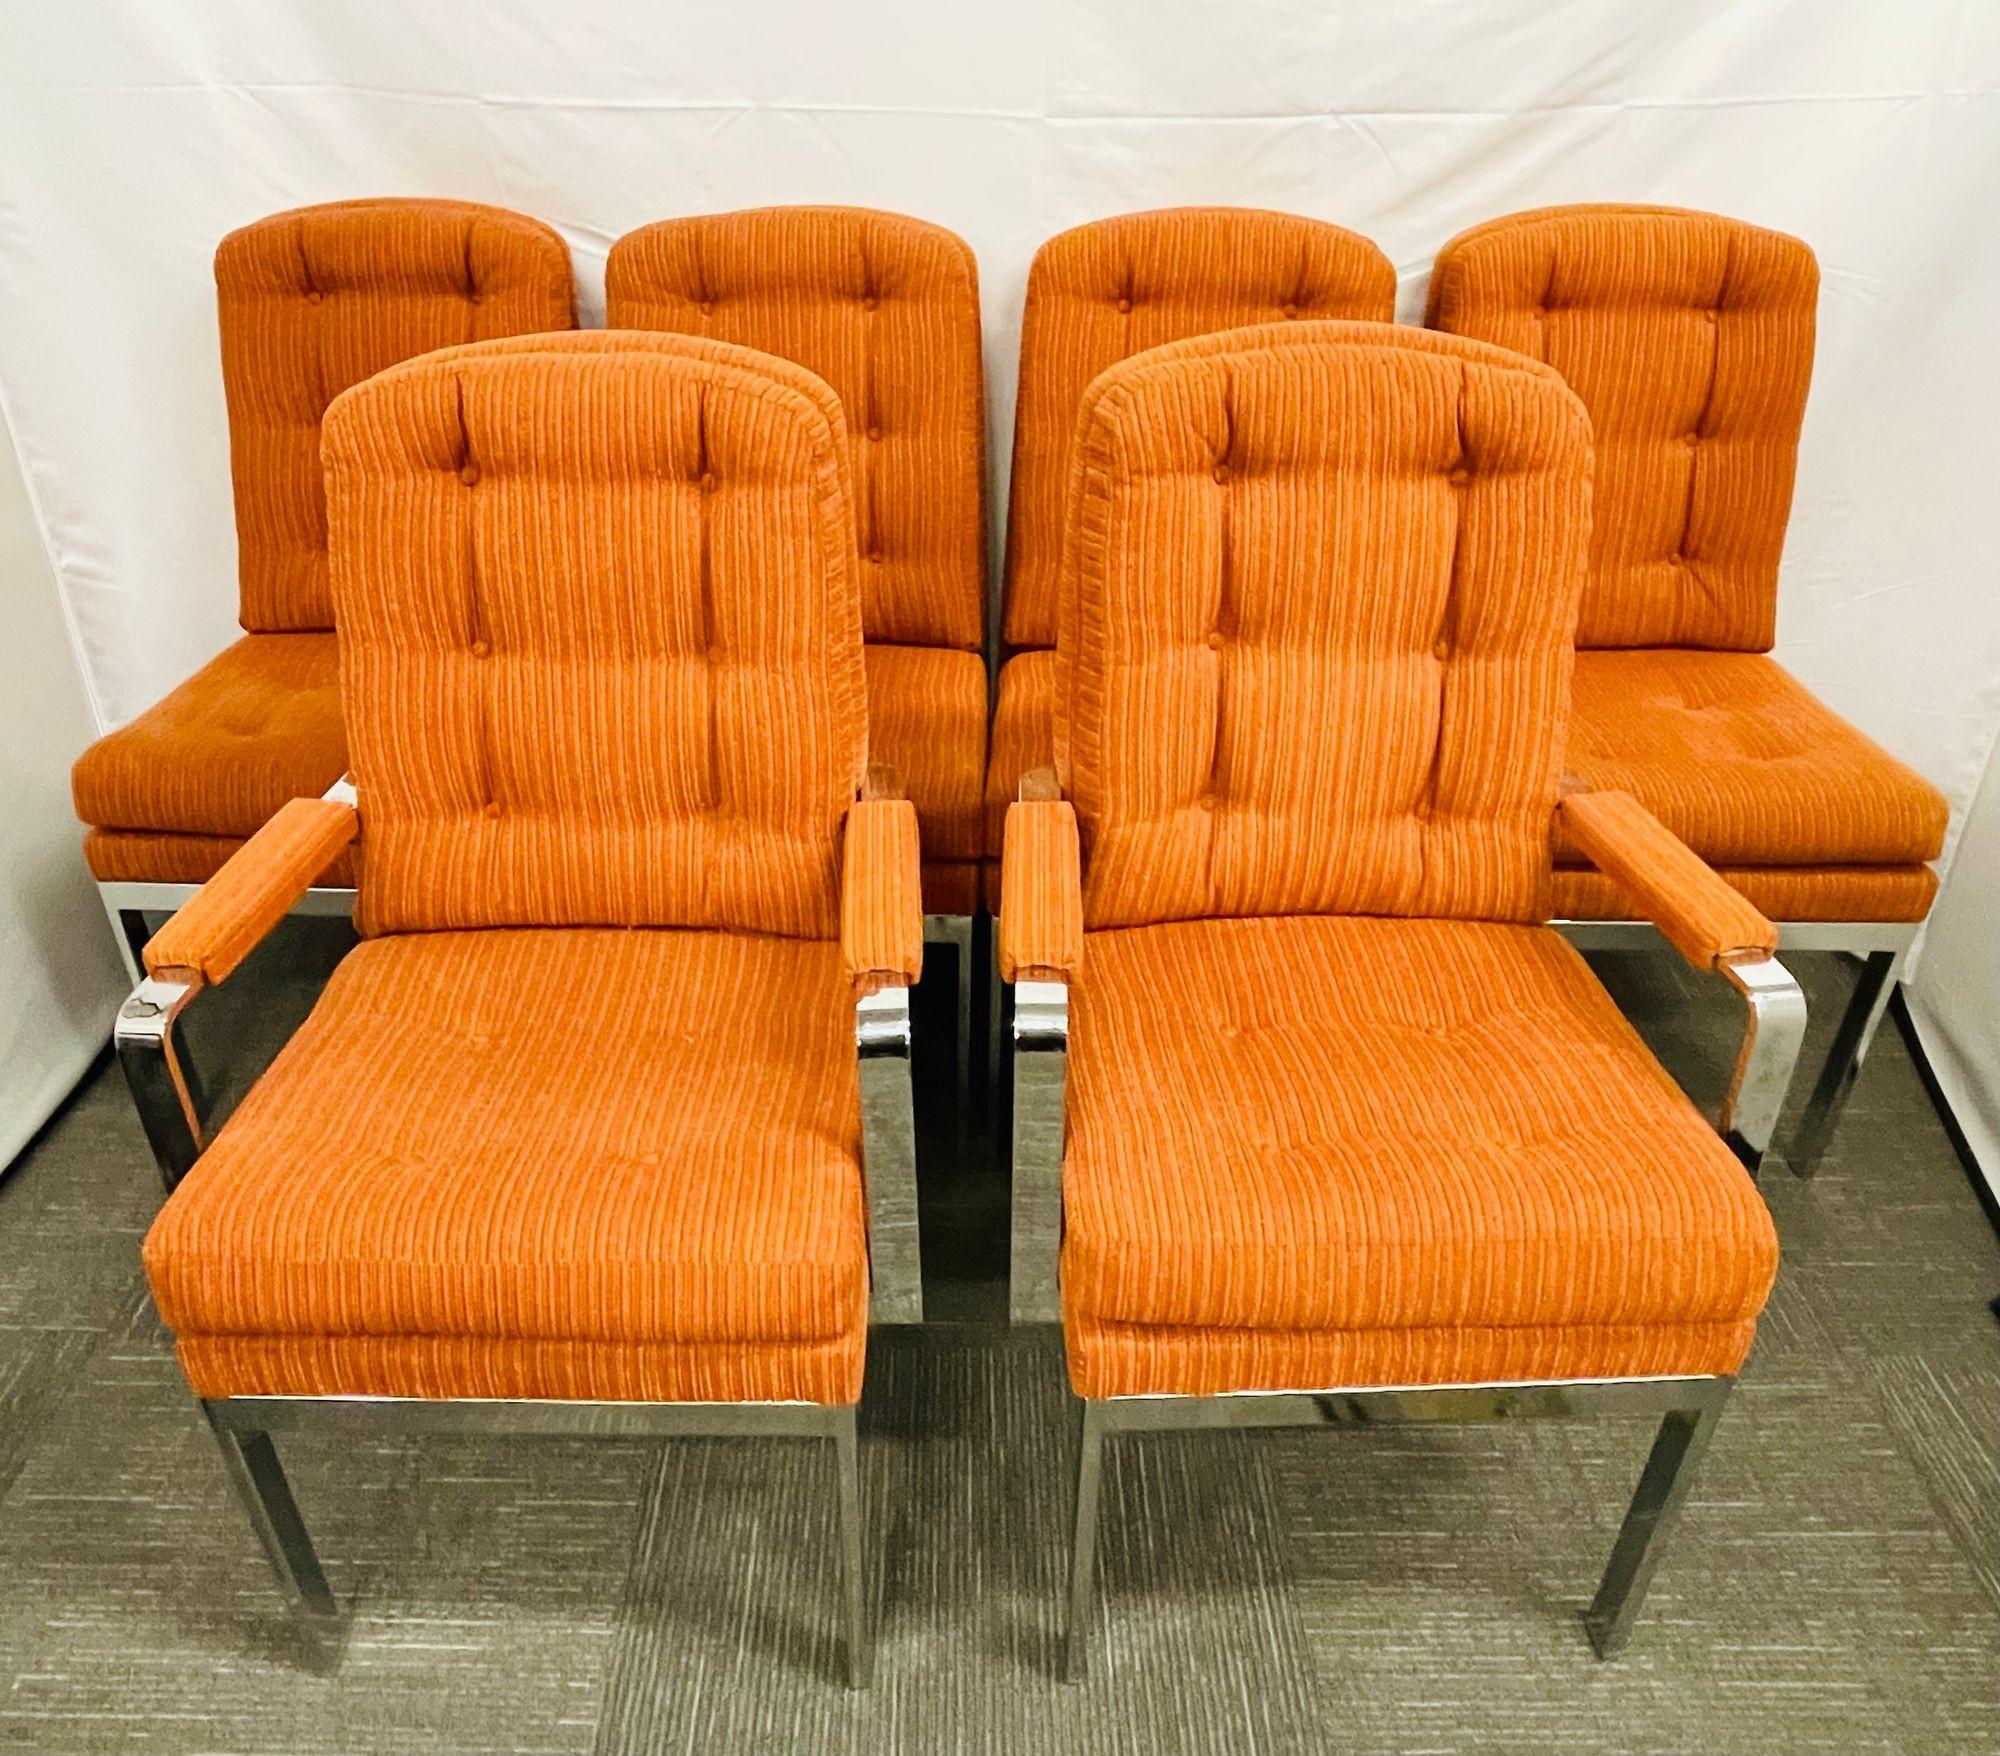 Set of six Mid-Century Modern Dining Chairs, Milo Baughman style, Chrome, Fabric
Set of six Mid-Century Modern dining room chairs comprised of four side chairs and a pair of arm chairs. Both comfortable as well as sturdy and strong, each is made